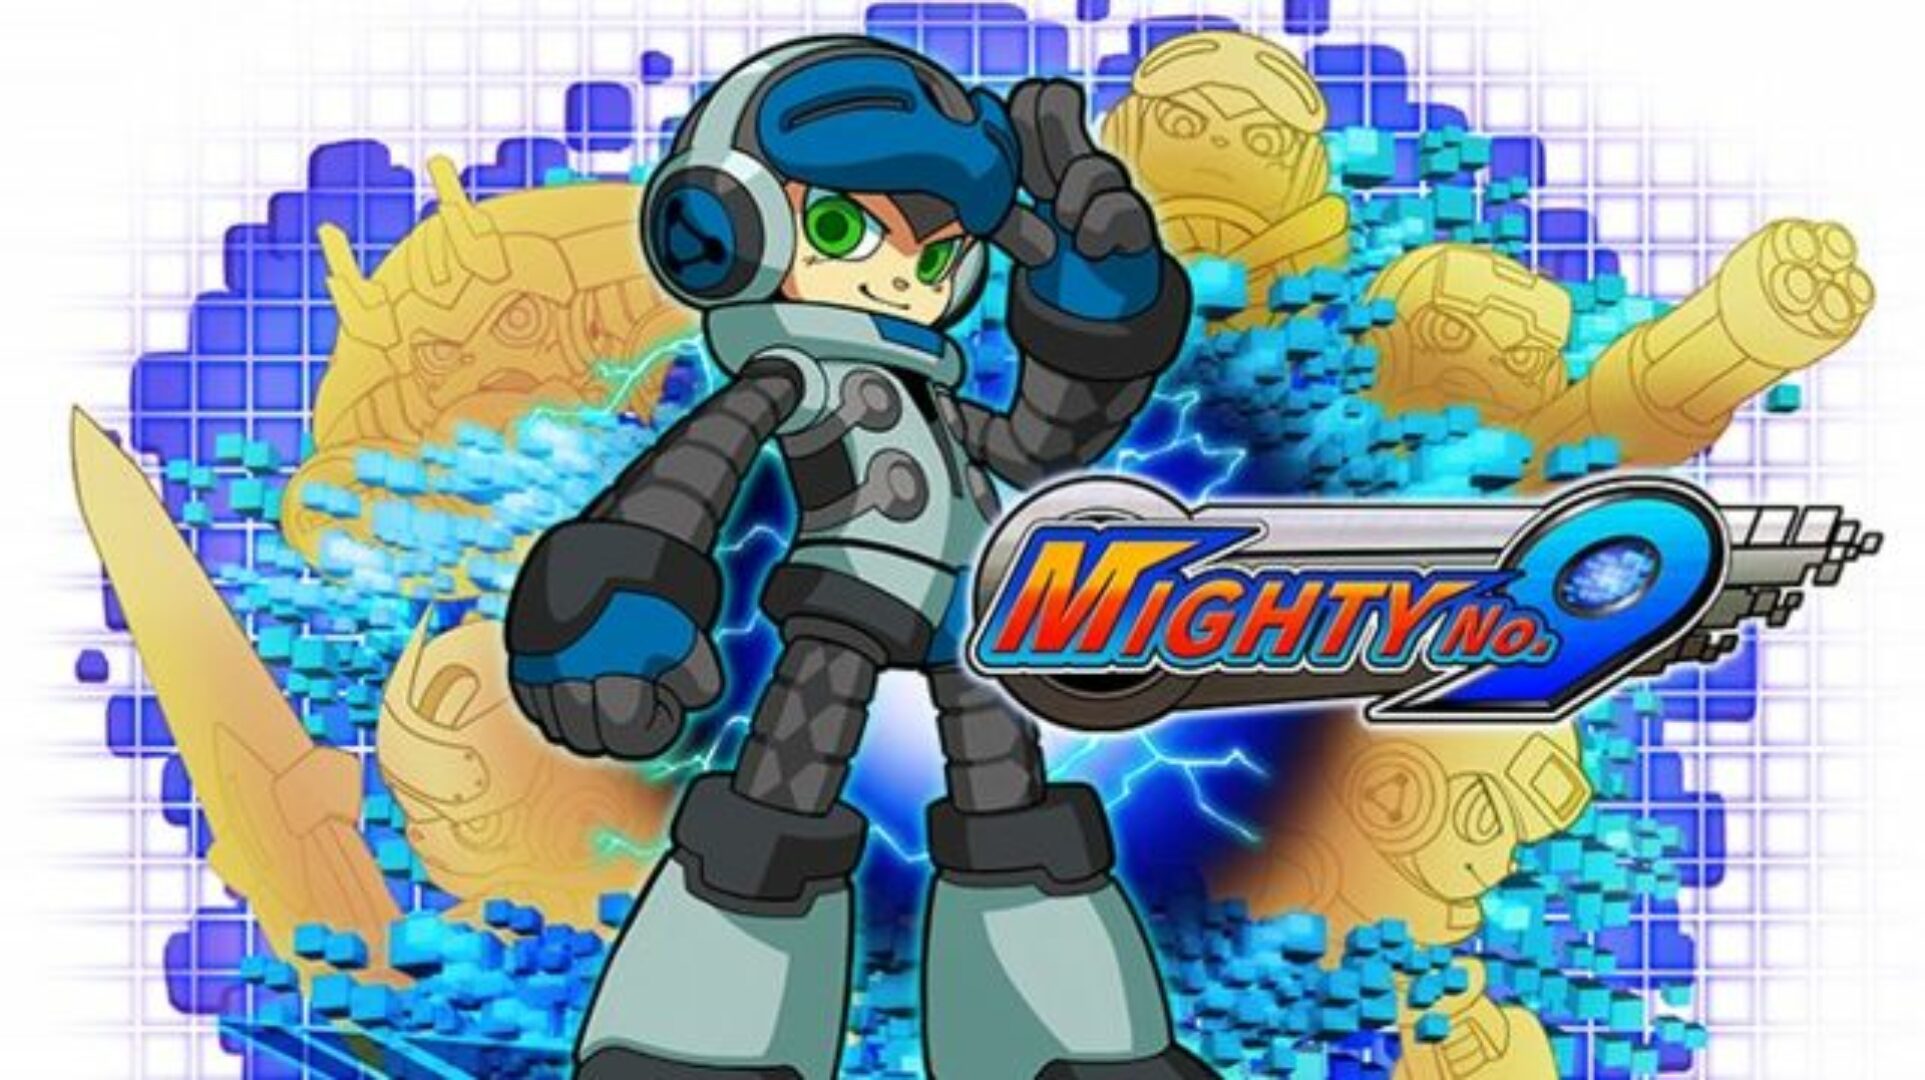 Rumor: Will Mighty No. 9 Release In 2015?